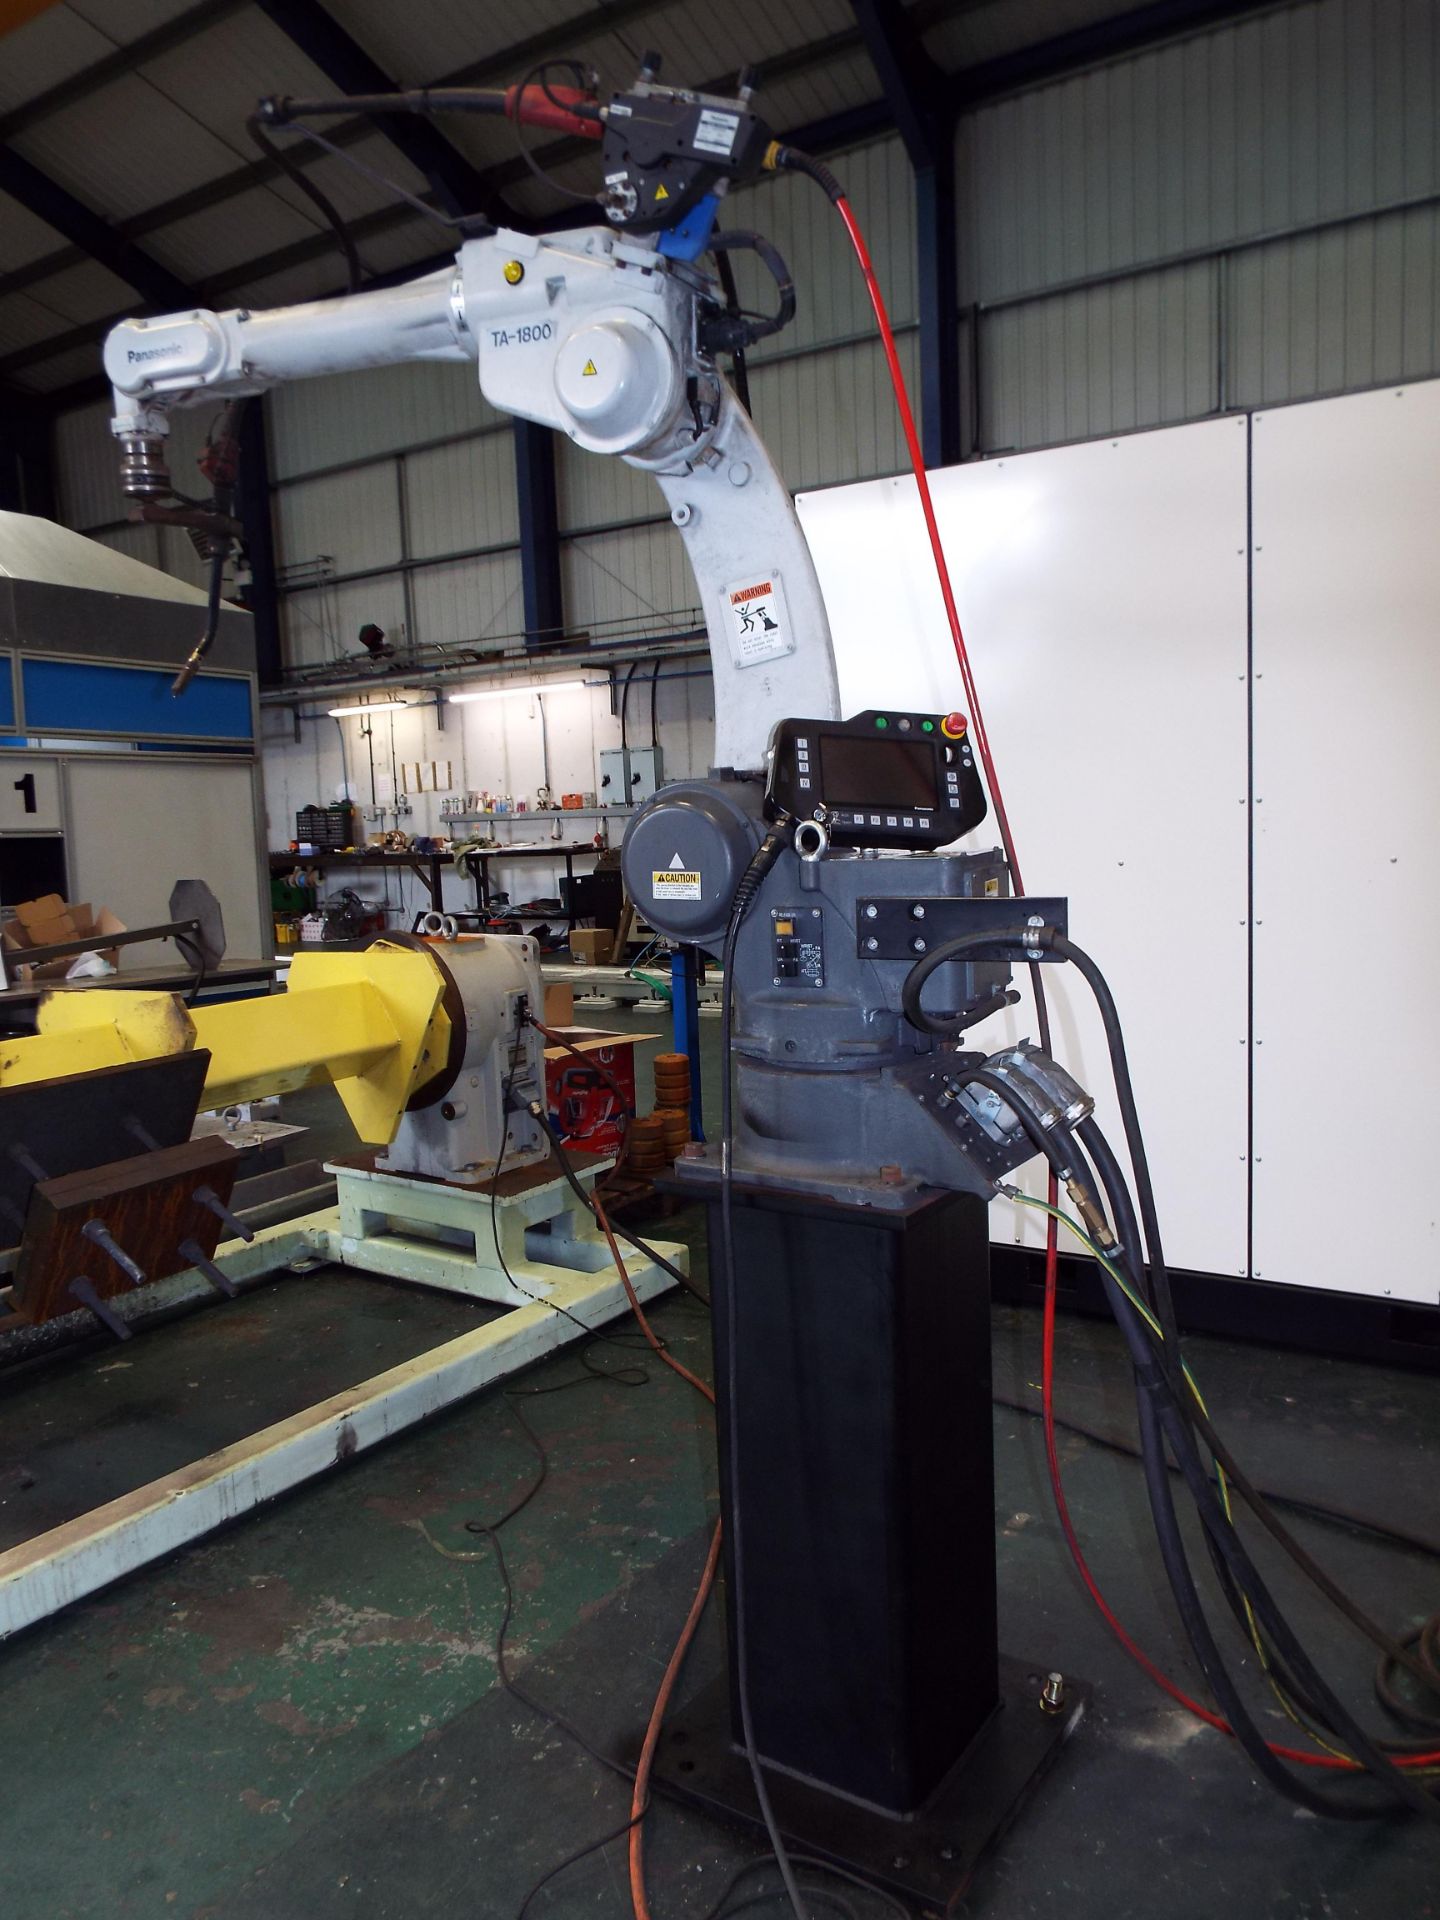 Panasonic TA1800 MIG Welding Robot cw Power Source,Transformer & 7th Axis Rotating Positioner - Image 2 of 10